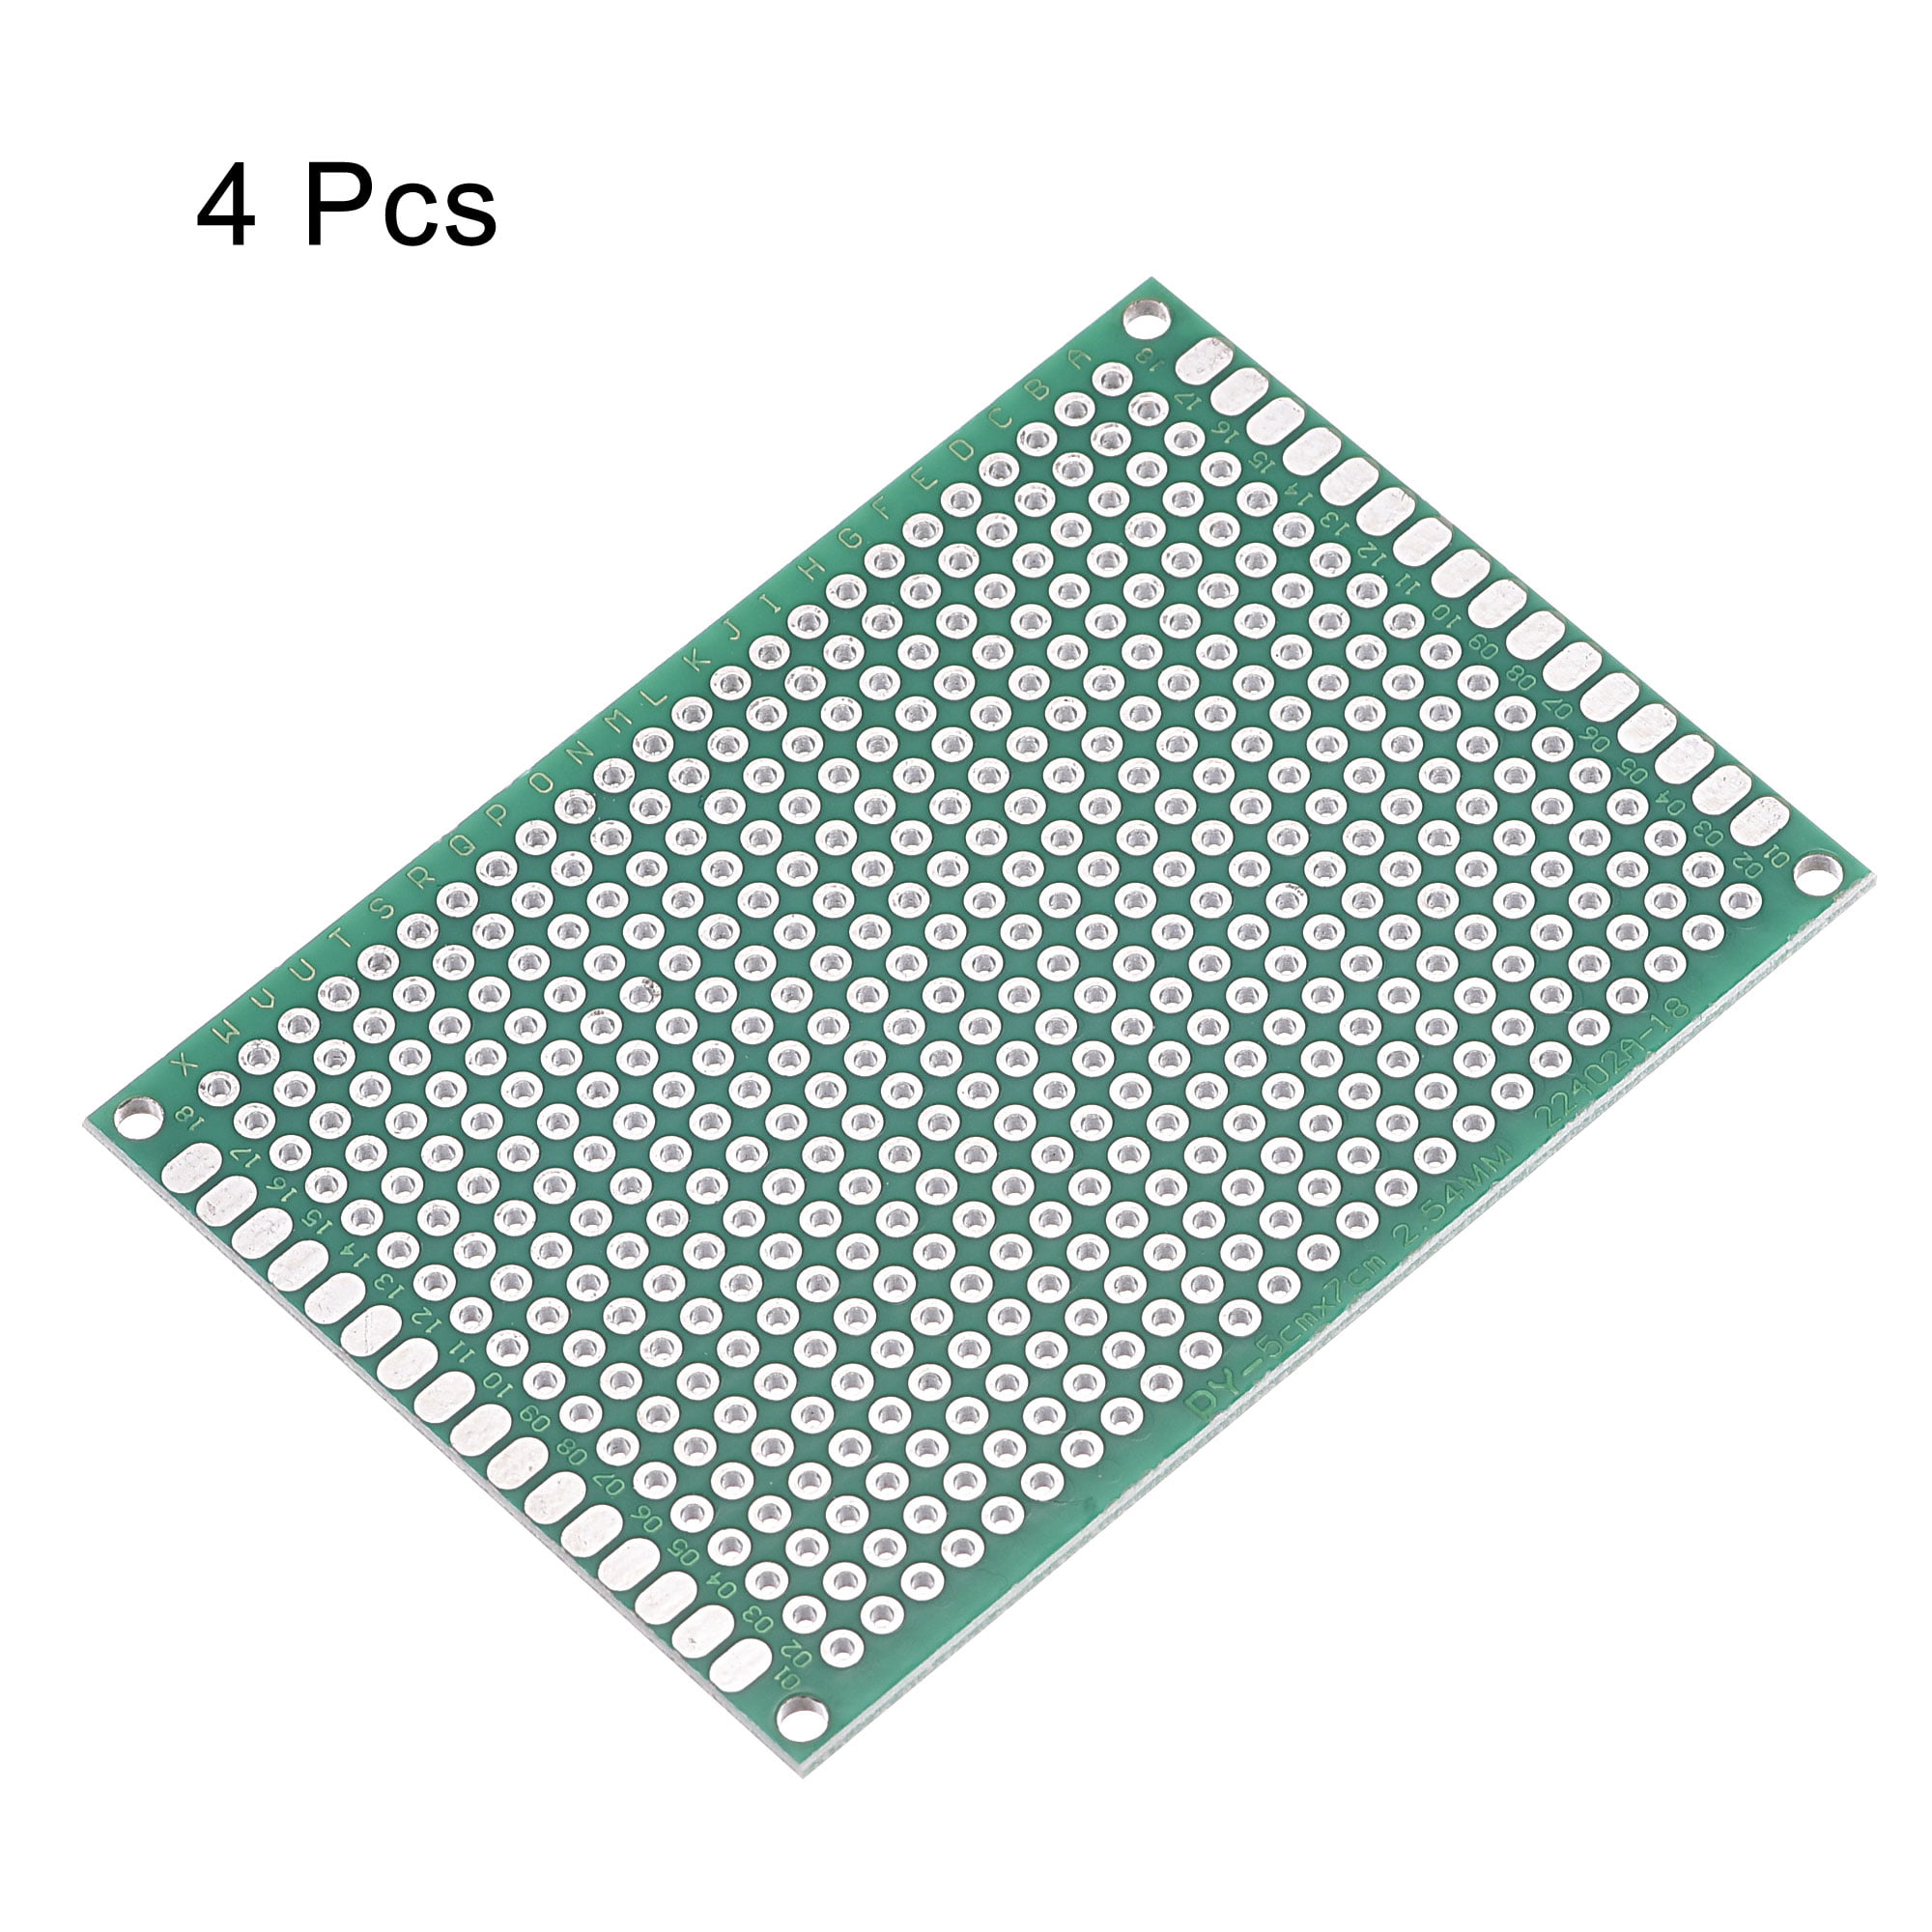 pcb 2Pcs PCB Board Double Sided Printed Circuit Prototyping Boards 60mmx80mm Green 